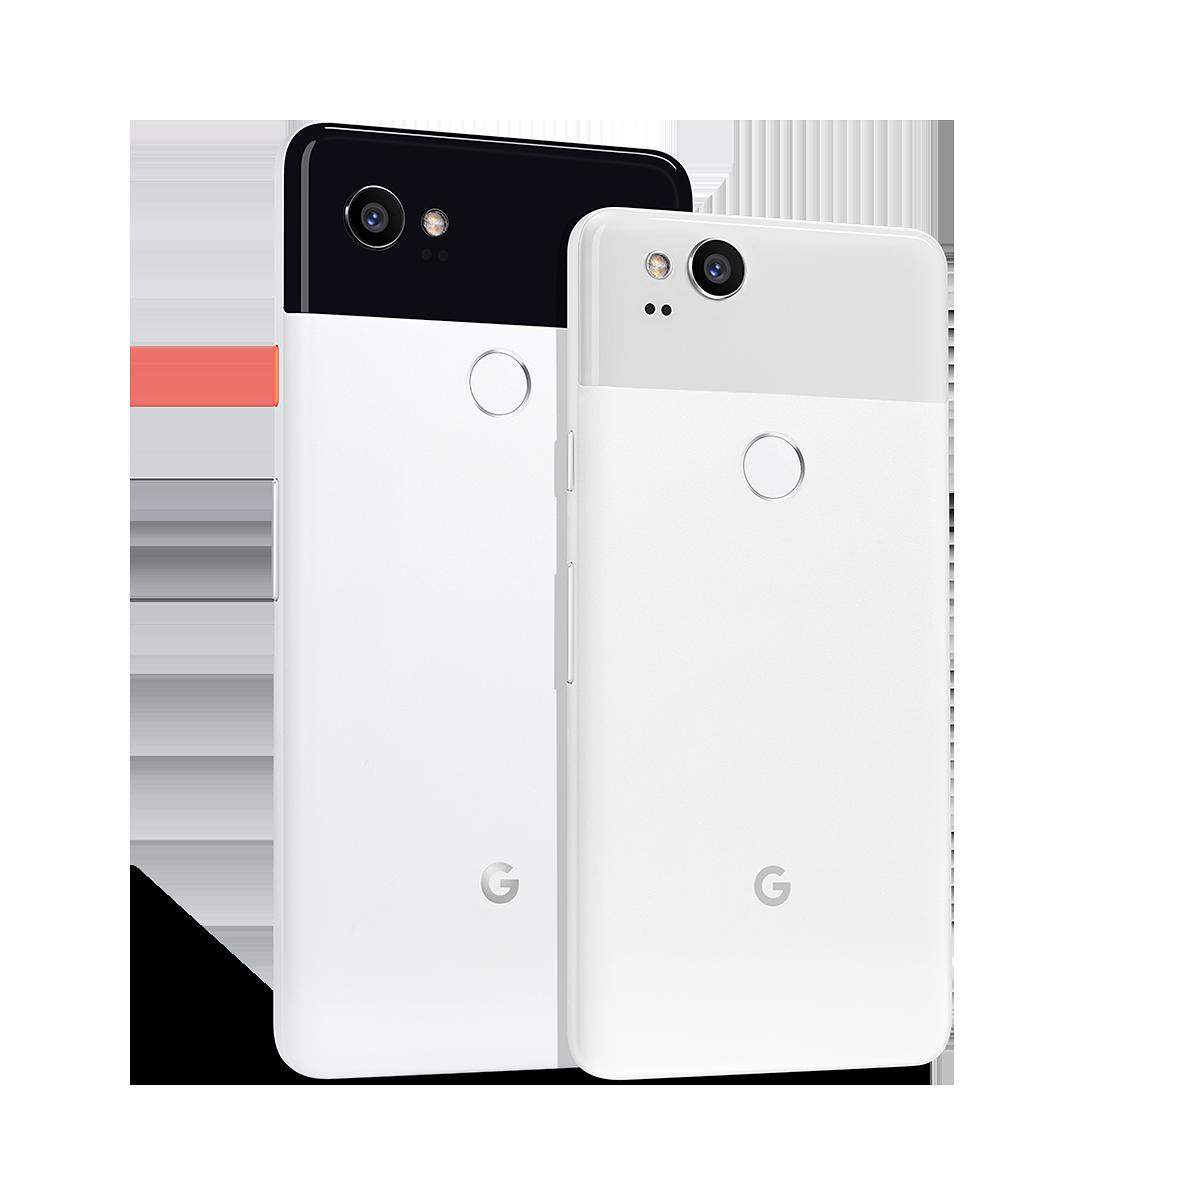 Google Adwords Ad Example 2781 - Enjoy Up To $500 Back On Pixel 2 And A Promo Code For A Google Home Mini On Us Thru 12/31.